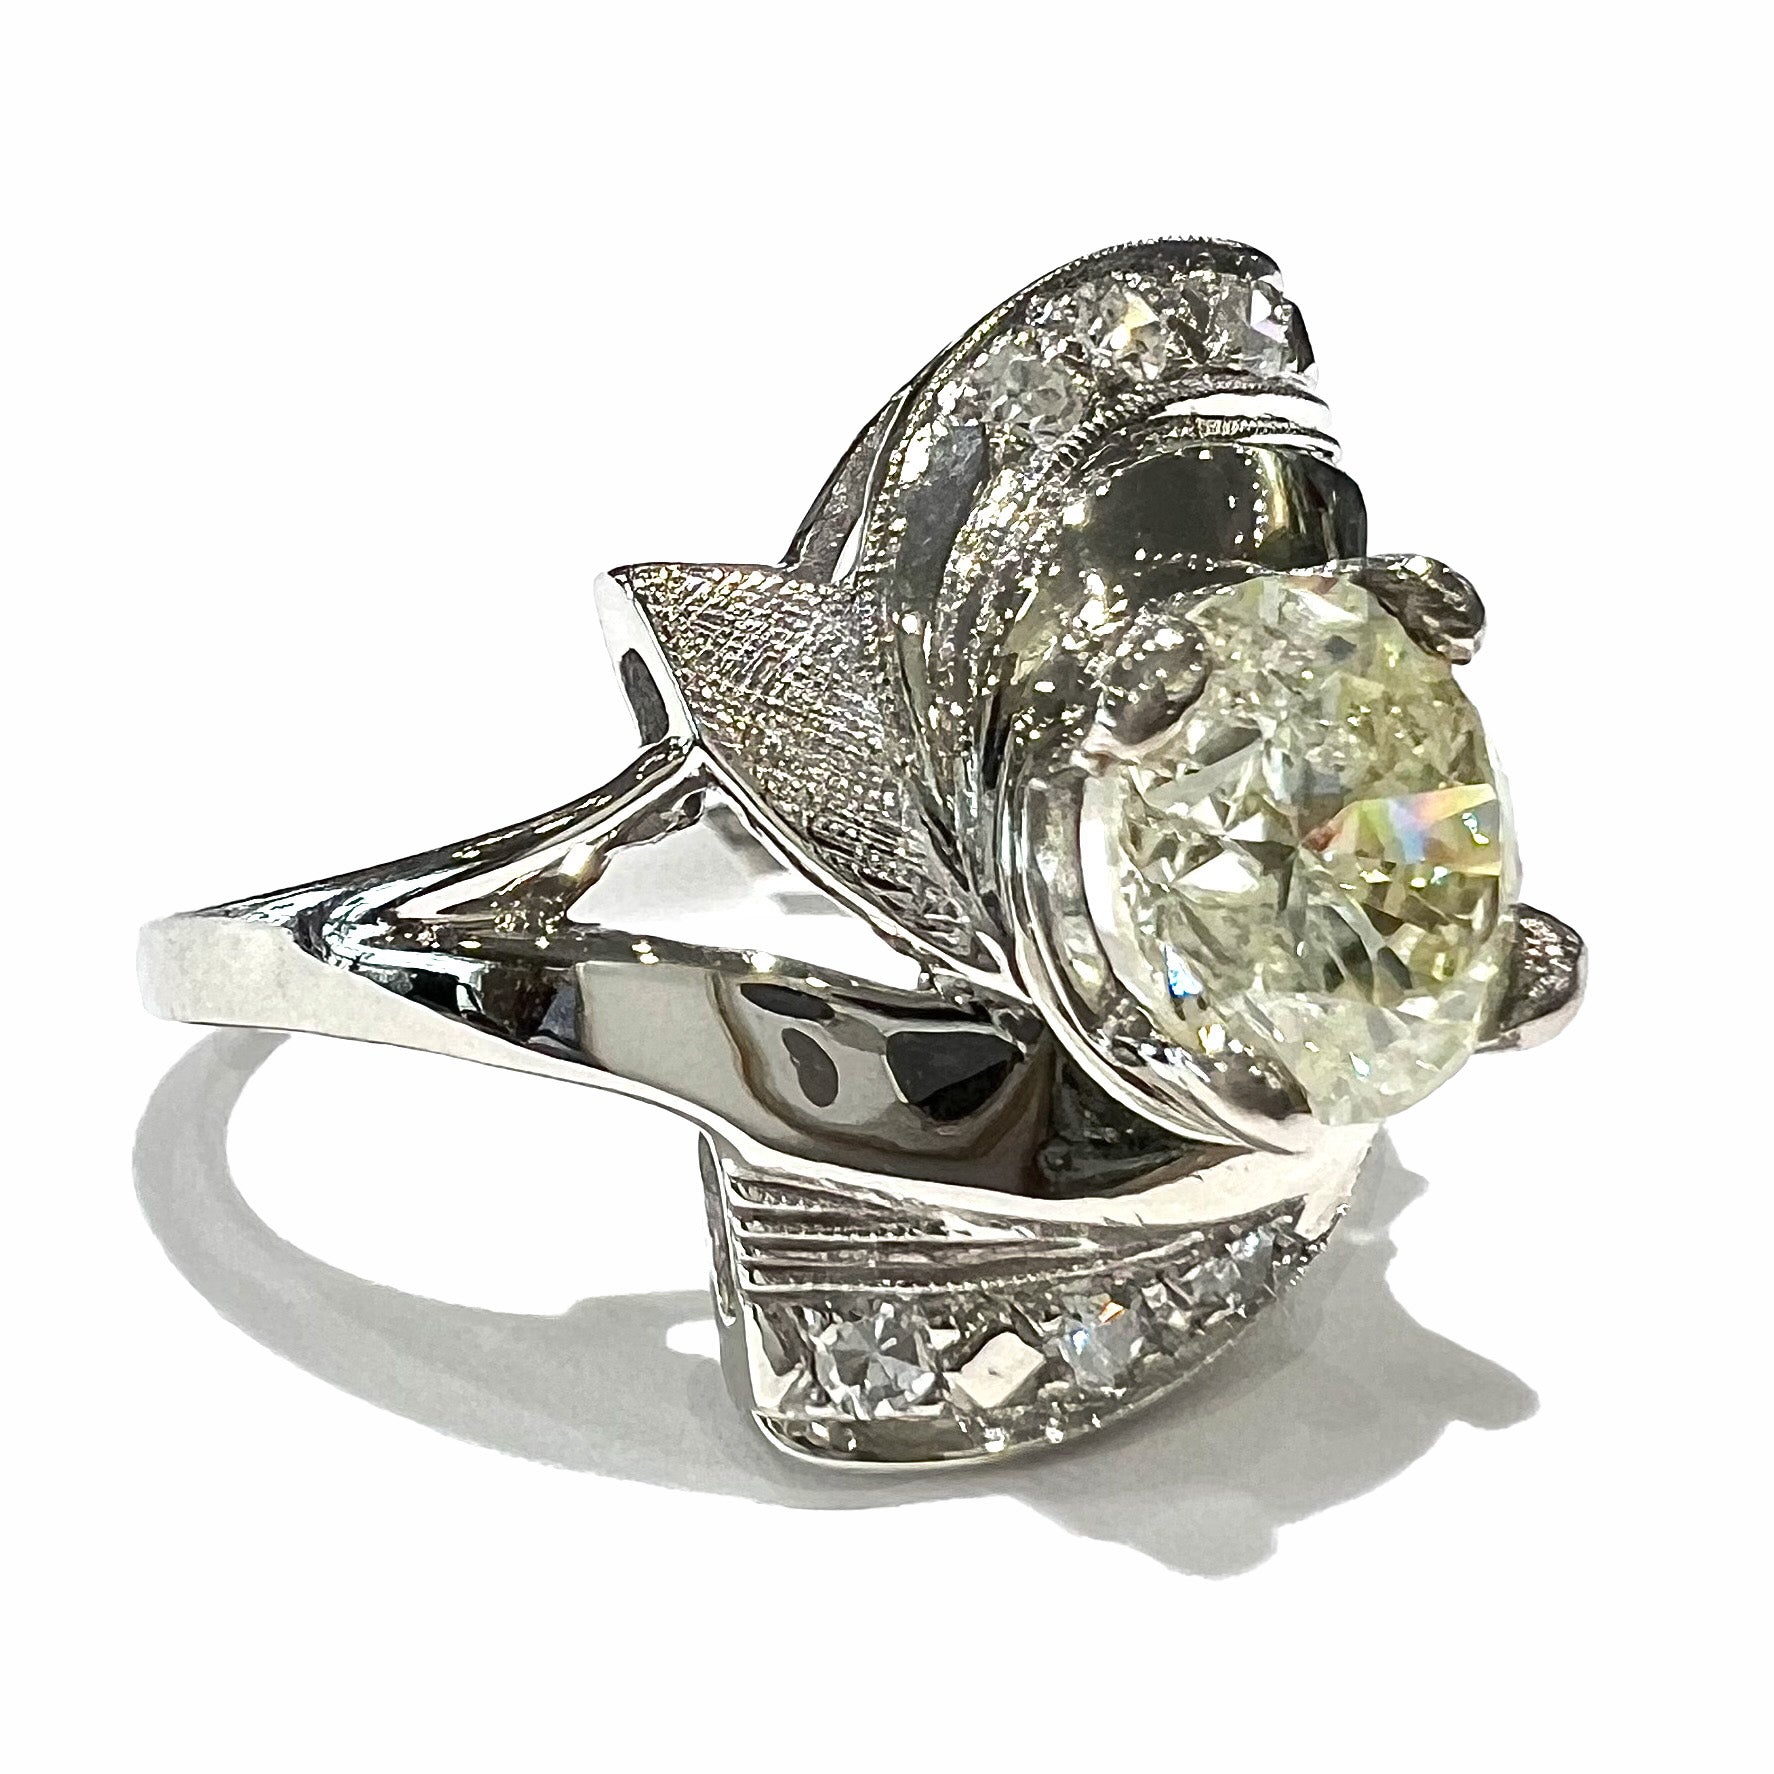 A vintage, Art Nouveau style diamond engagment ring.  The ring is white gold with a yellowish, M colored, 1.24 carat diamond.